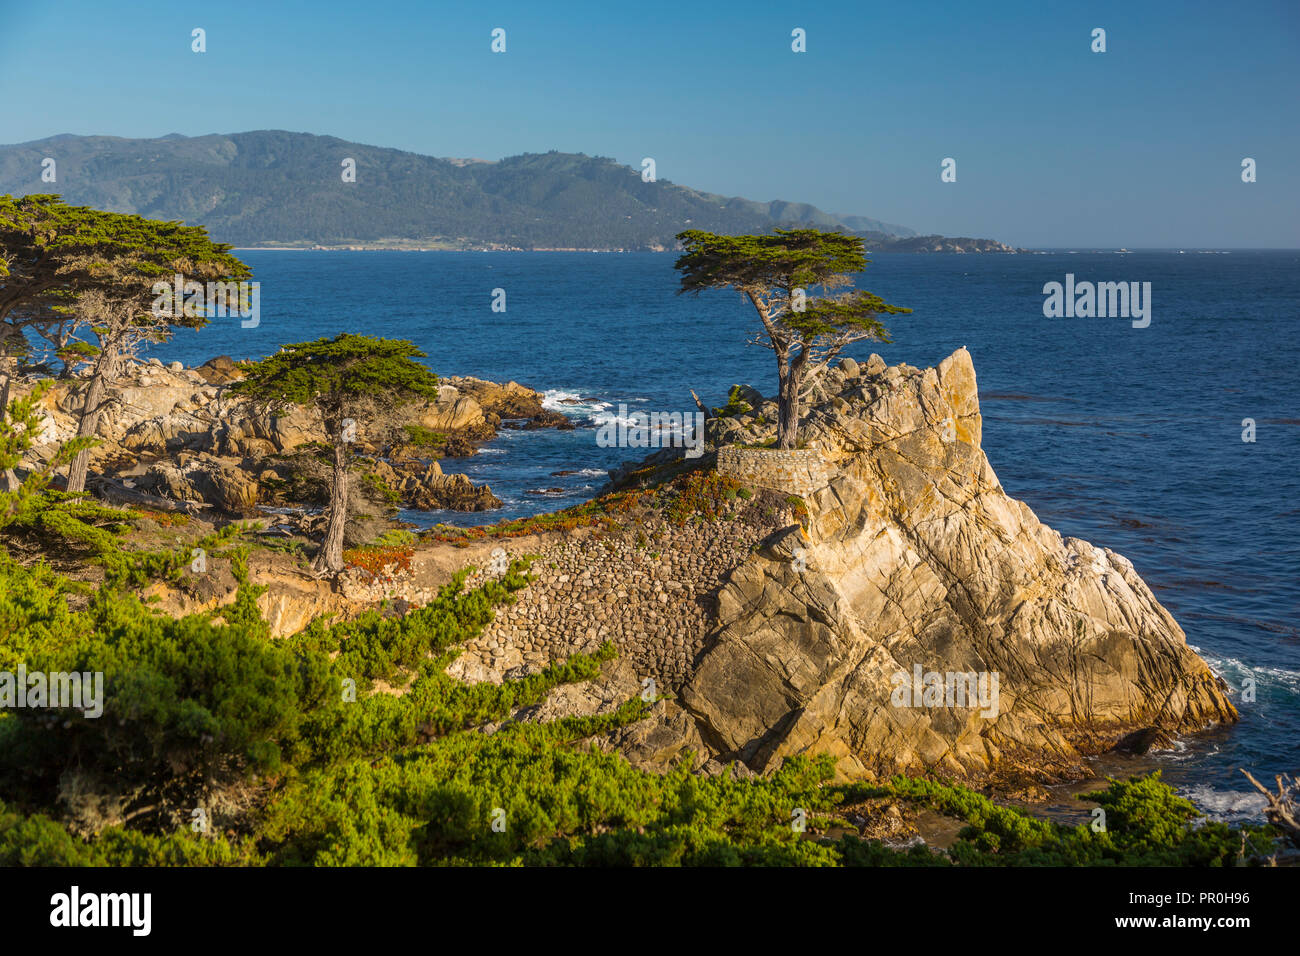 View of Carmel Bay and Lone Cypress at Pebble Beach, 17 Mile Drive, Peninsula, Monterey, California, United States of America, North America Stock Photo